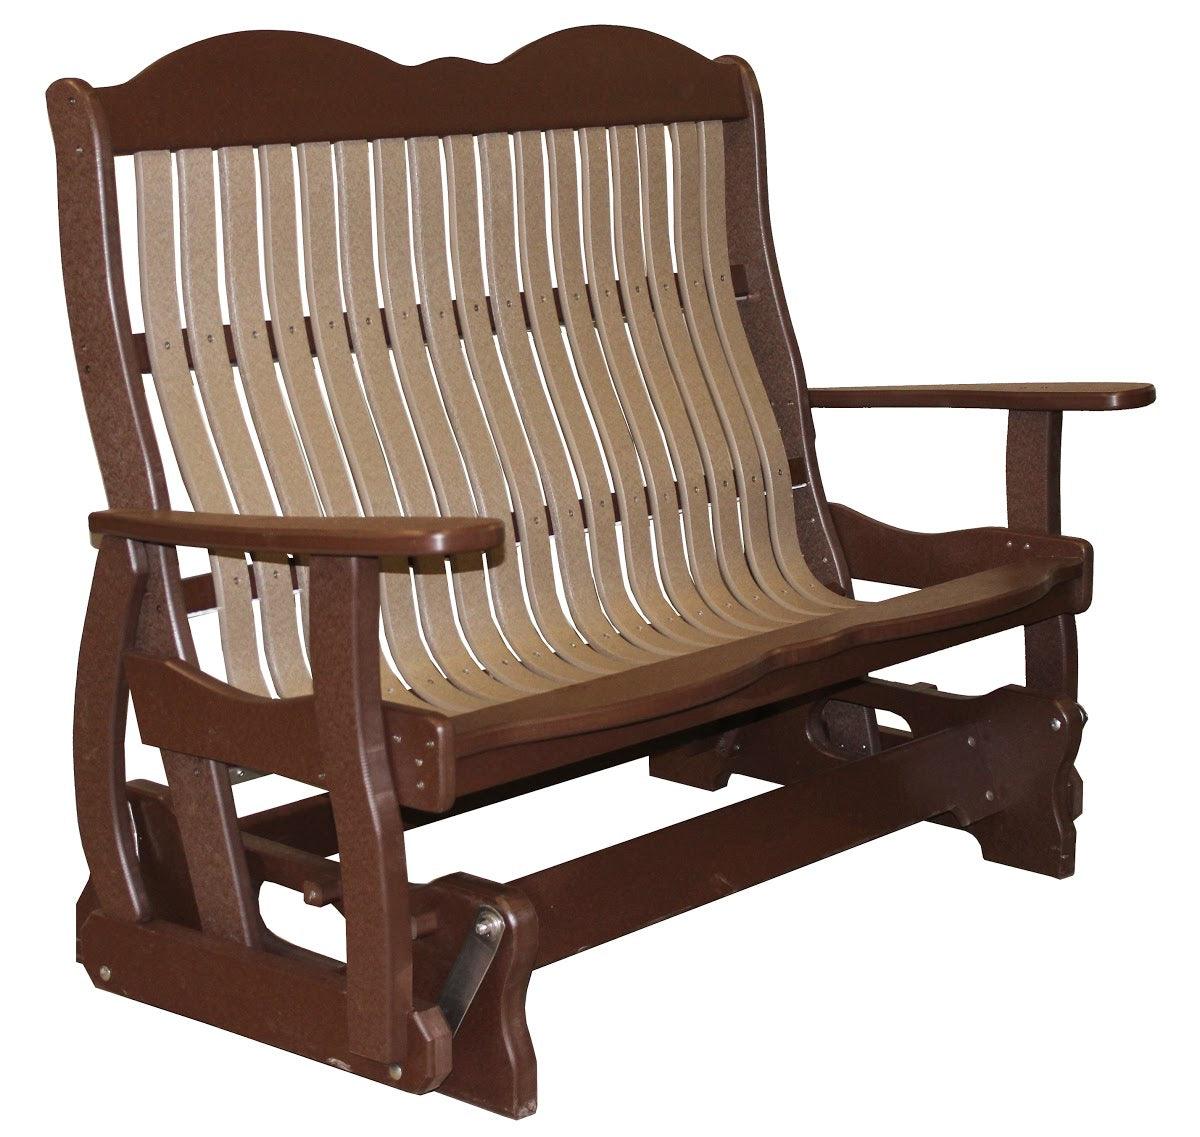 Classic Cottage Glider Bench Outdoor Furniture Meadowview